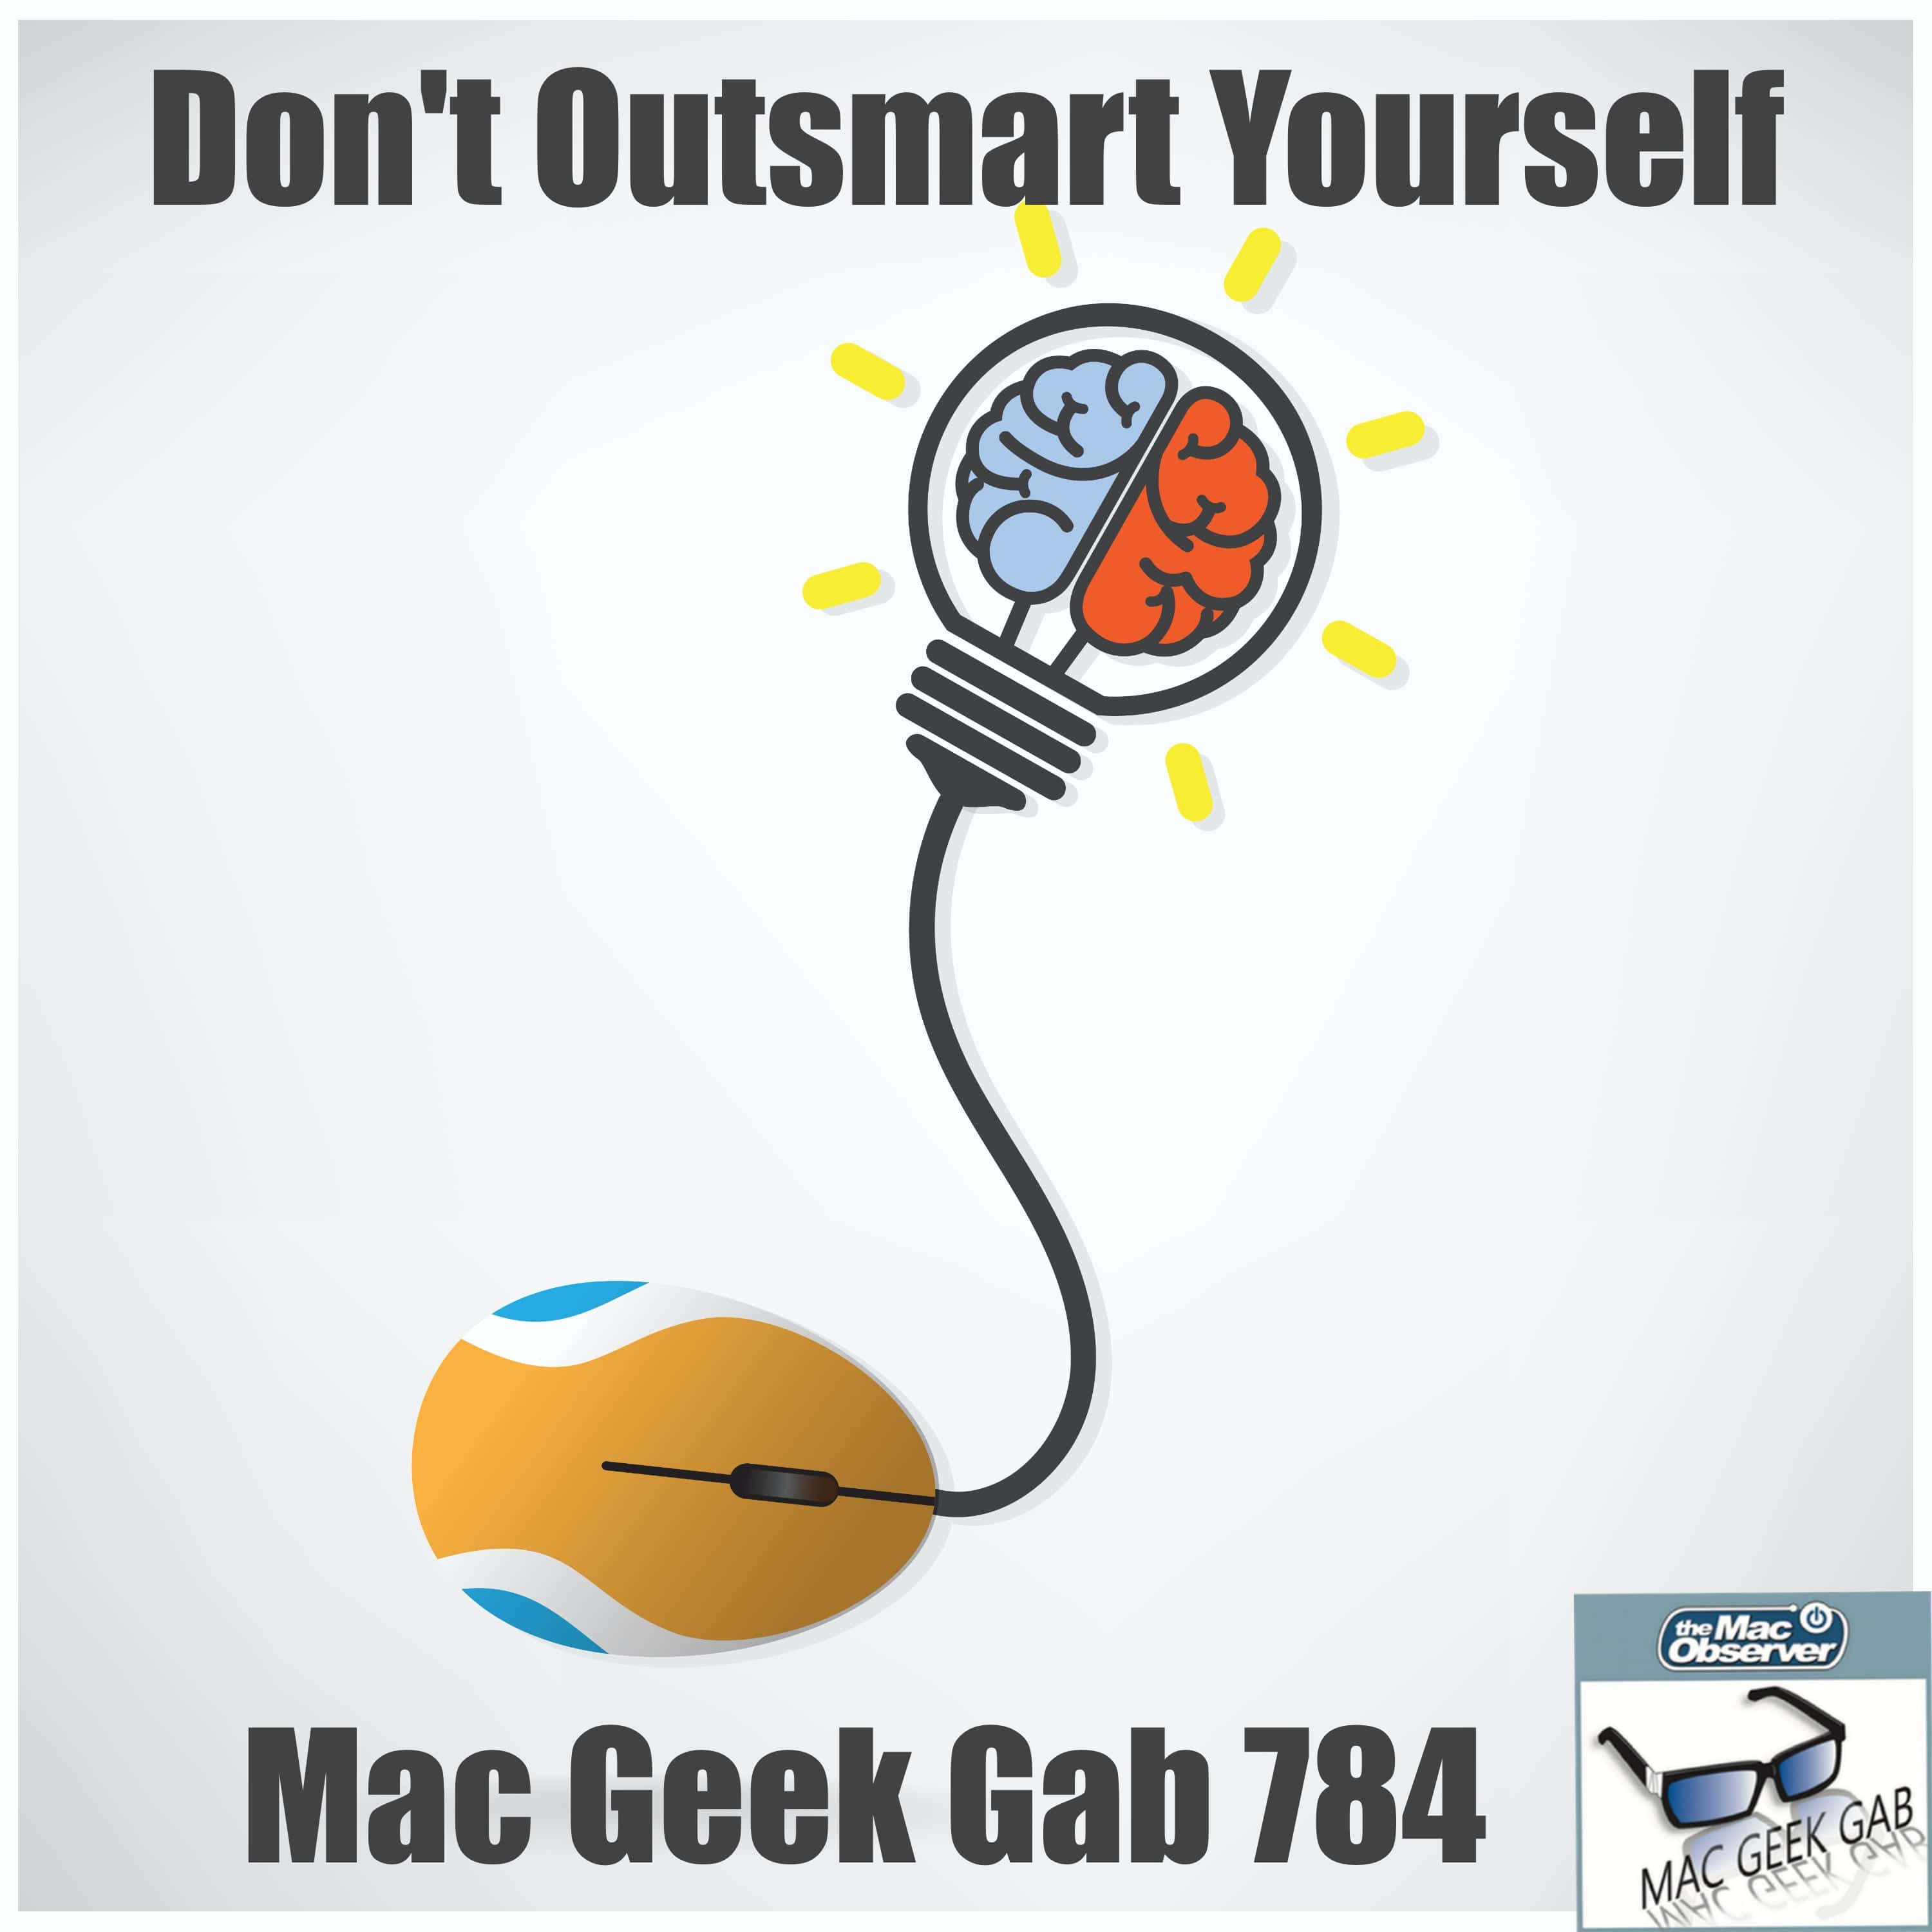 Don’t Outsmart Yourself – Mac Geek Gab 784